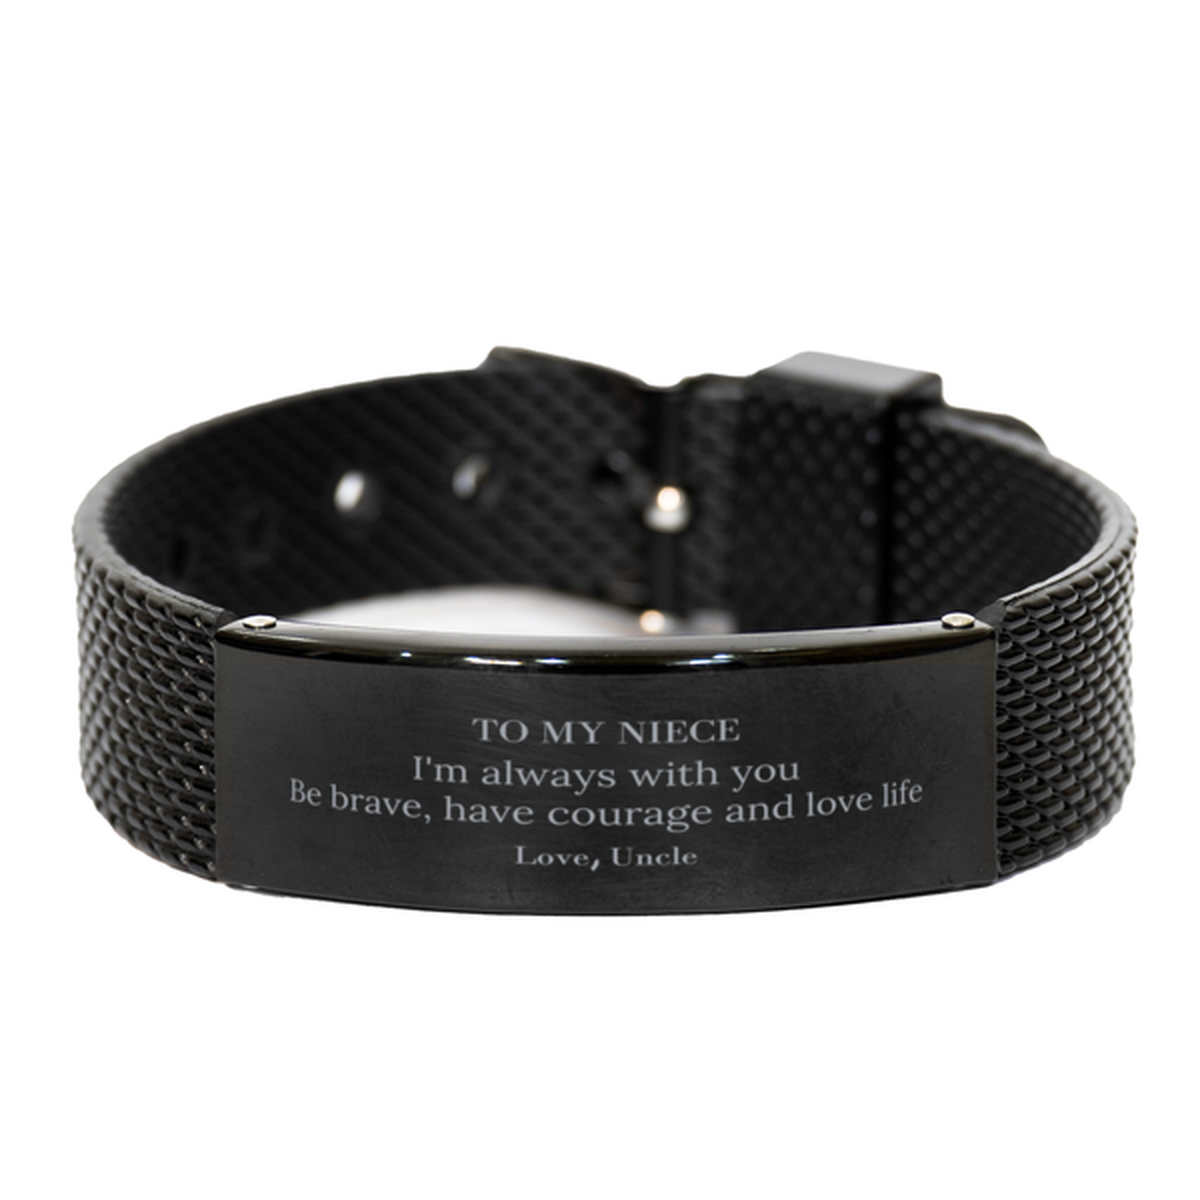 To My Niece Gifts from Uncle, Unique Black Shark Mesh Bracelet Inspirational Christmas Birthday Graduation Gifts for Niece I'm always with you. Be brave, have courage and love life. Love, Uncle